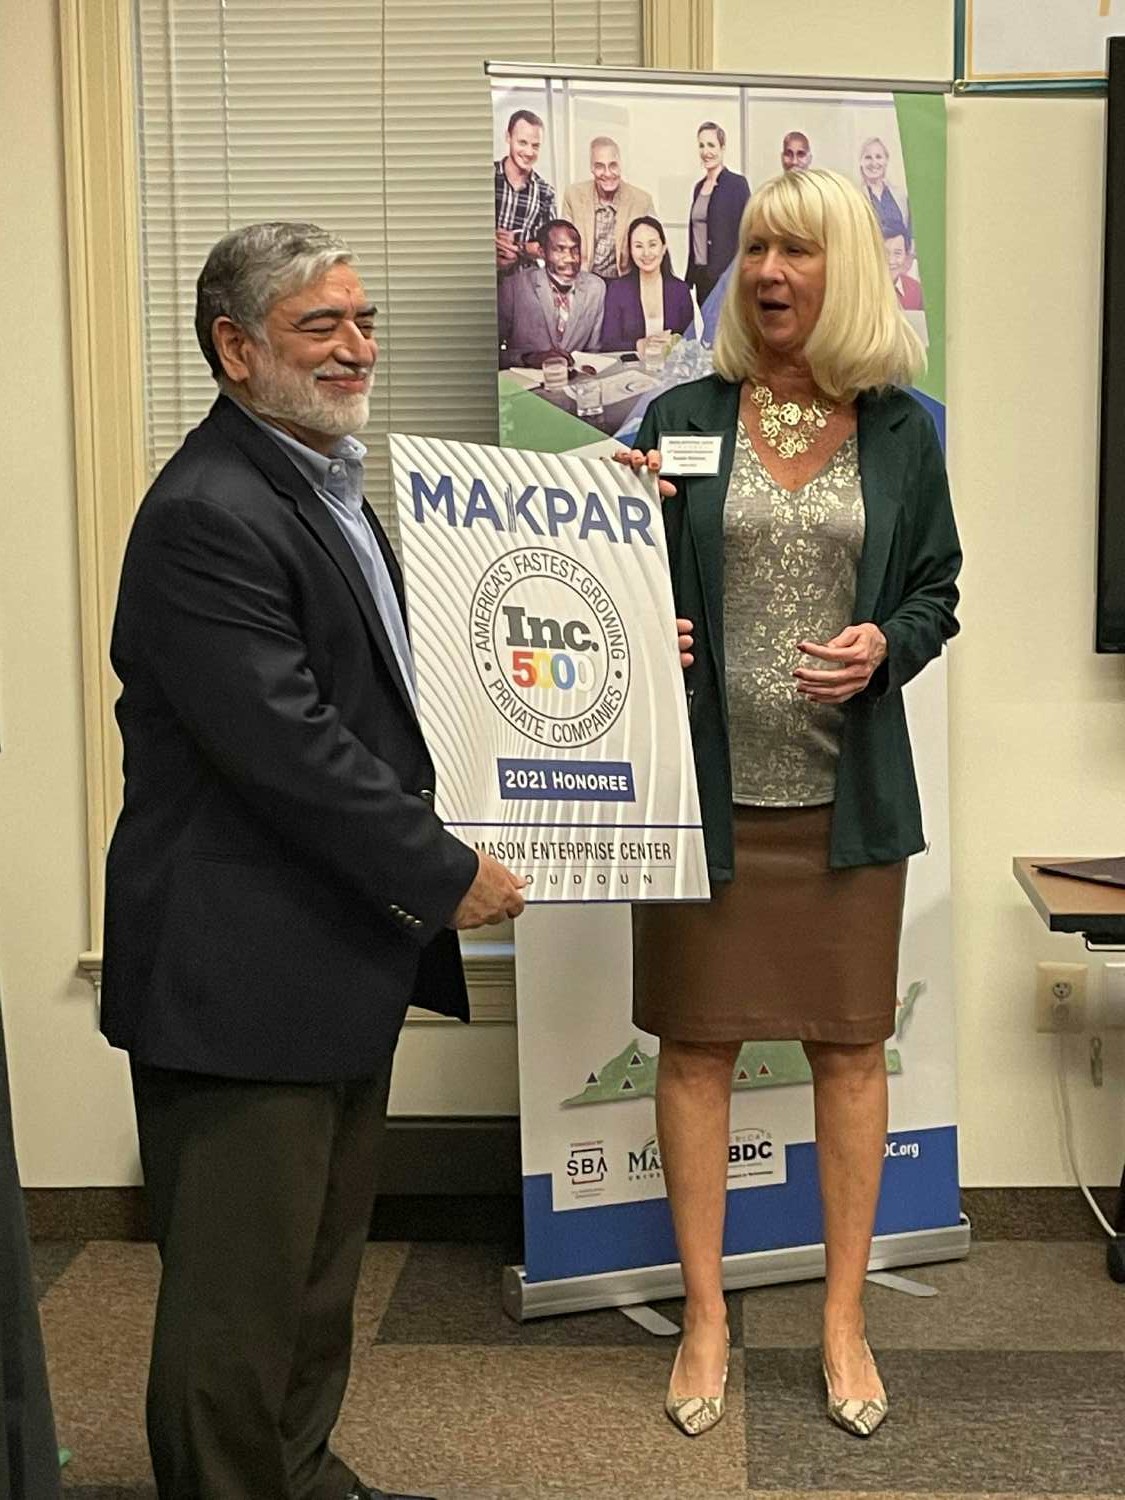 Makpar being recognized for placing on the Inc 5000 list by the Mason Enterprise Center, where we started! 